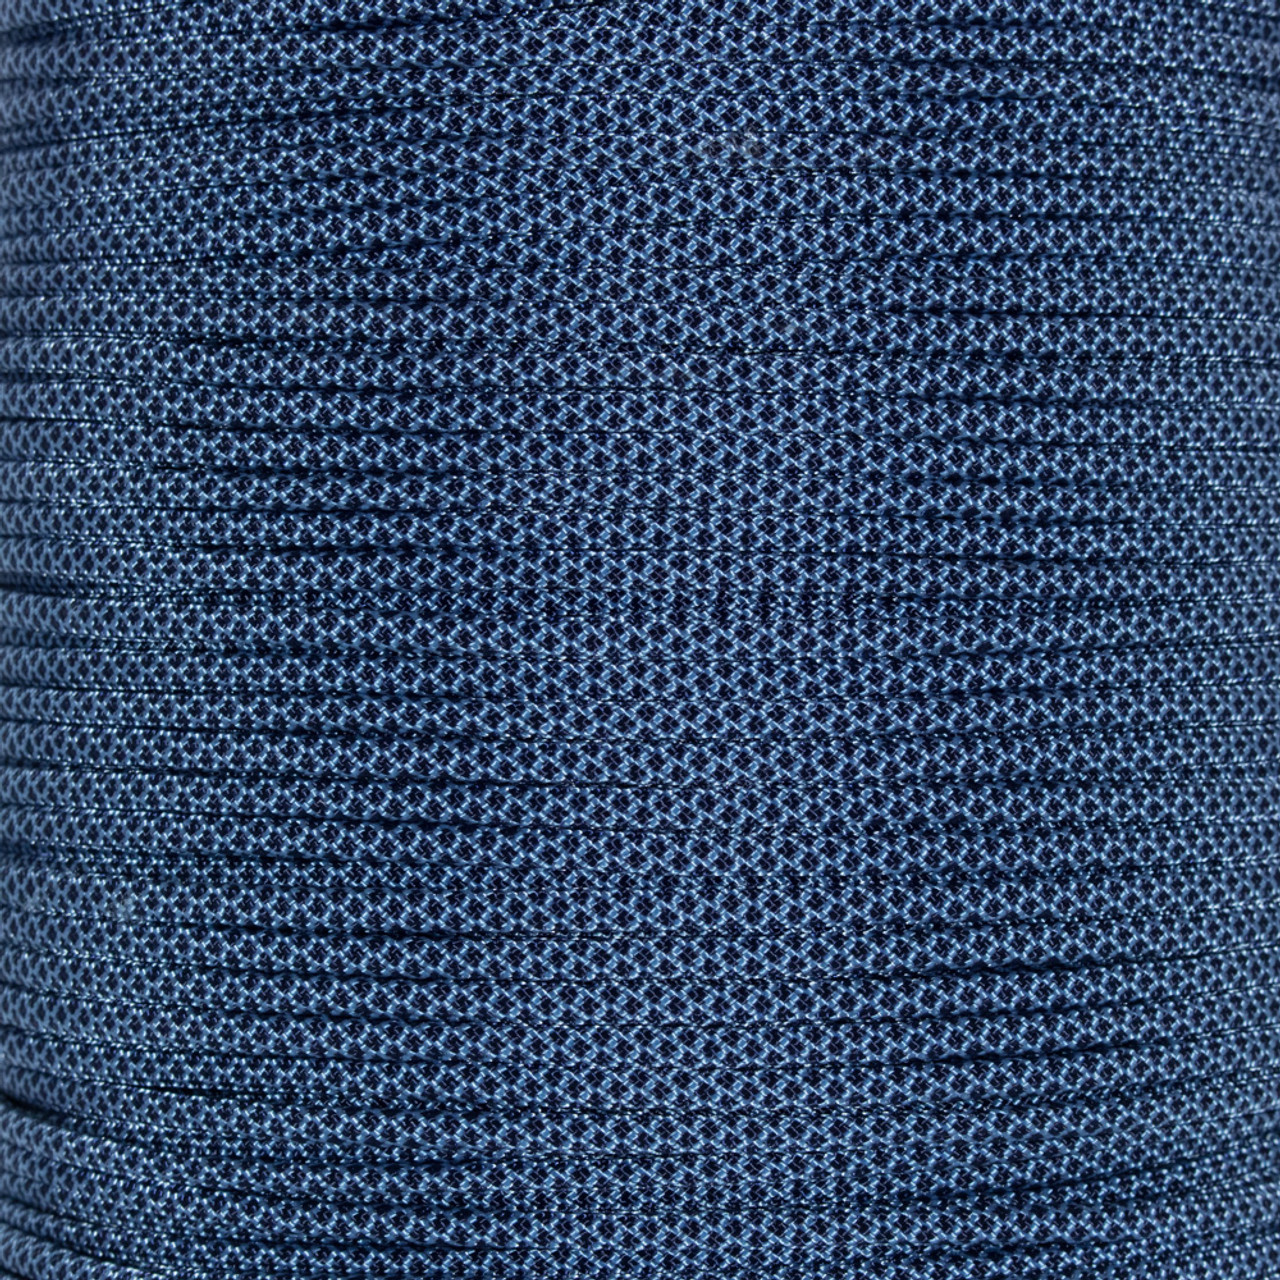 Midnight Blue - 550 Paracord (Reflective)